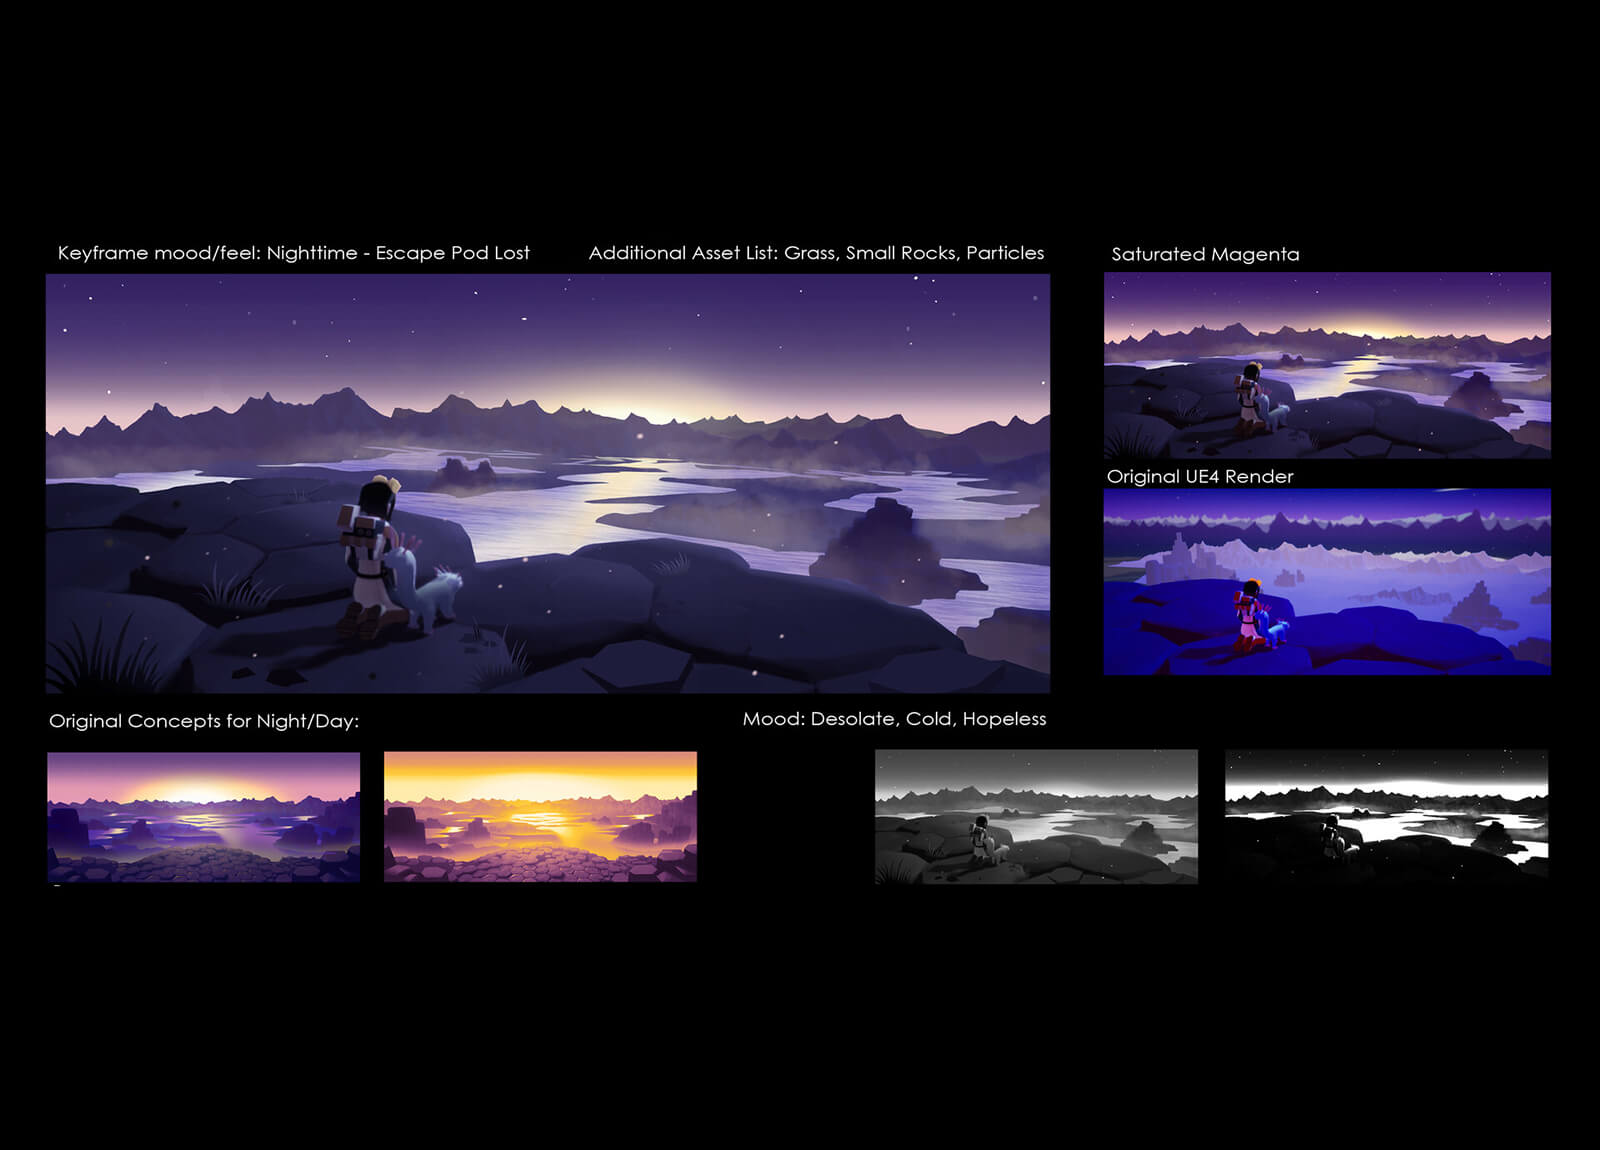 Various concepts, mood sketches, and UE4 render showing the astronaut and alien creature looking out at an alien landscape.